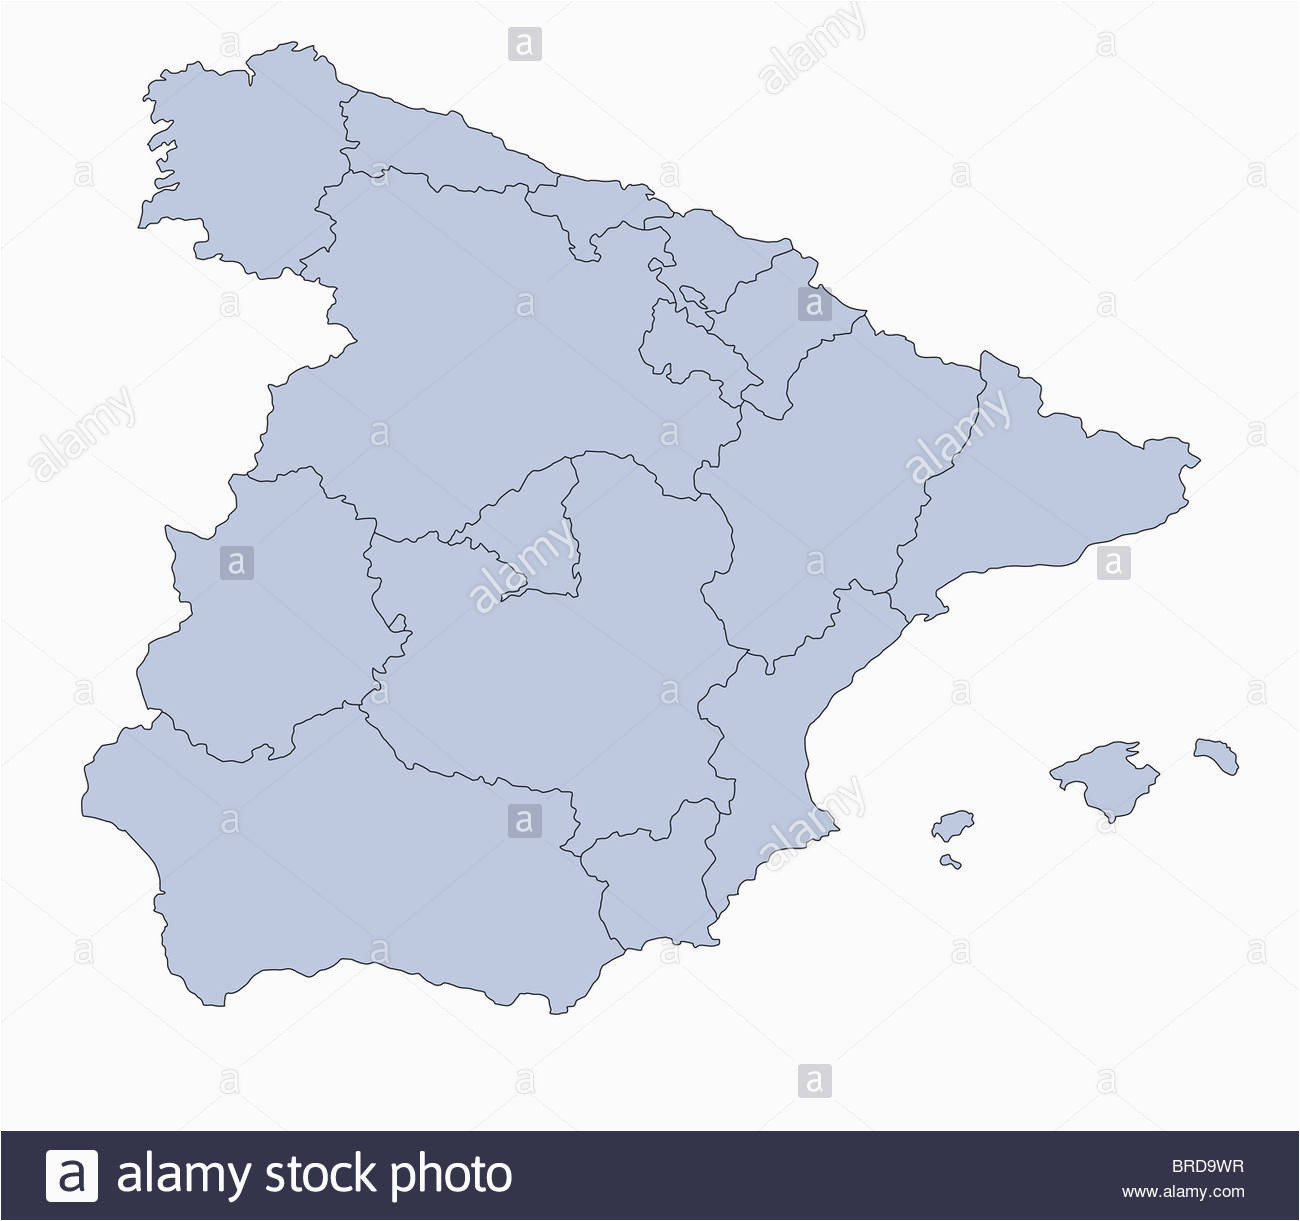 spain map stock photos spain map stock images alamy